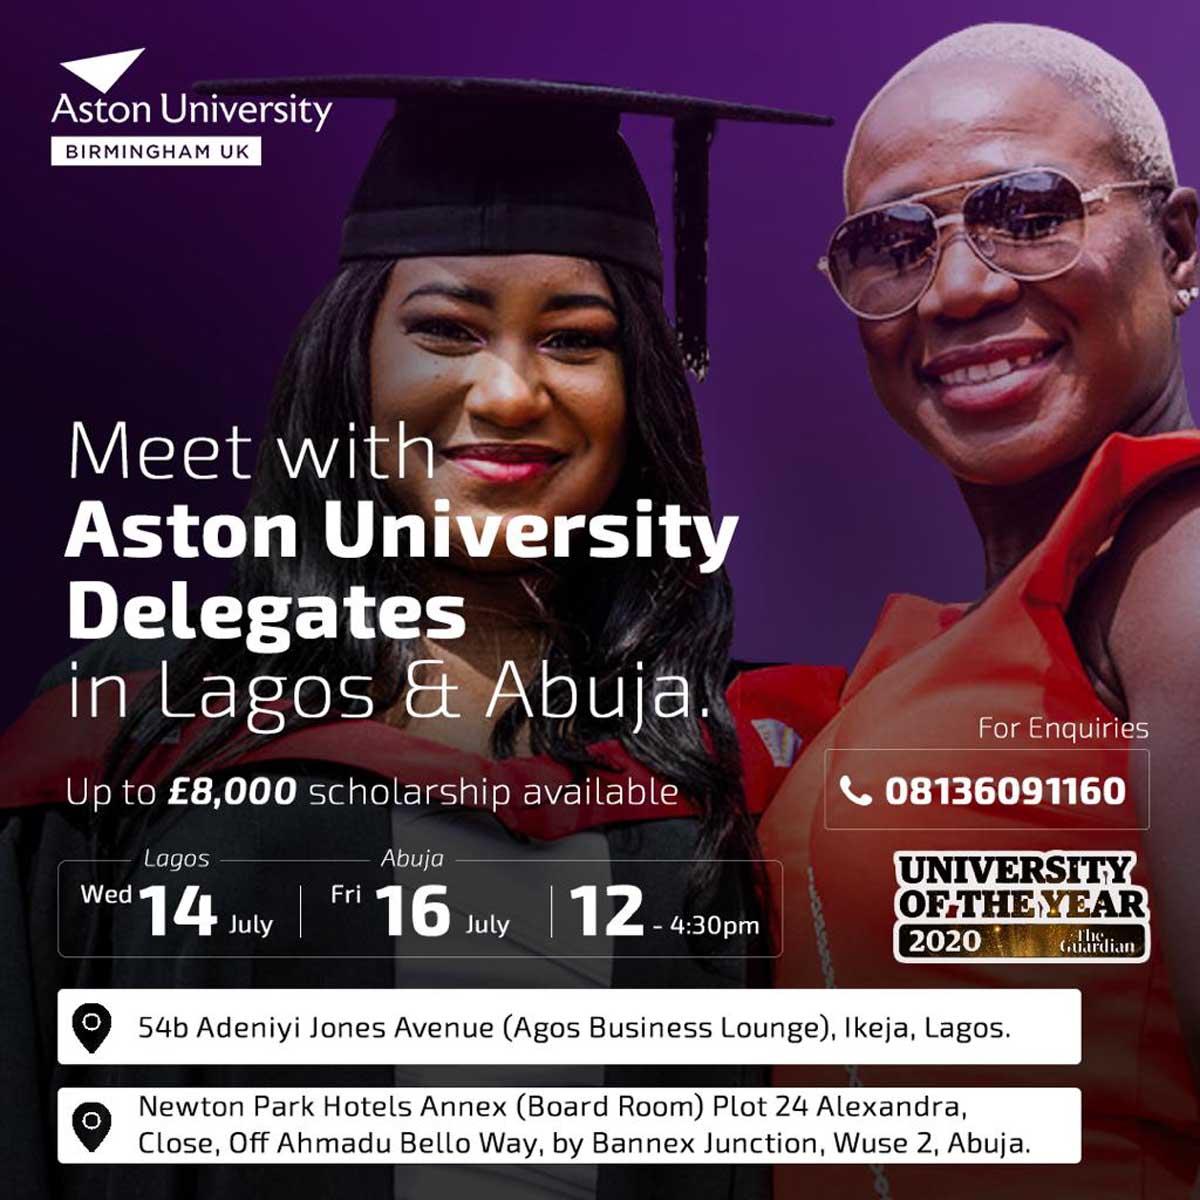 SPONSORED] Applications are still open at Aston University for September  2021 and up to £8000 scholarships available! - Vanguard News